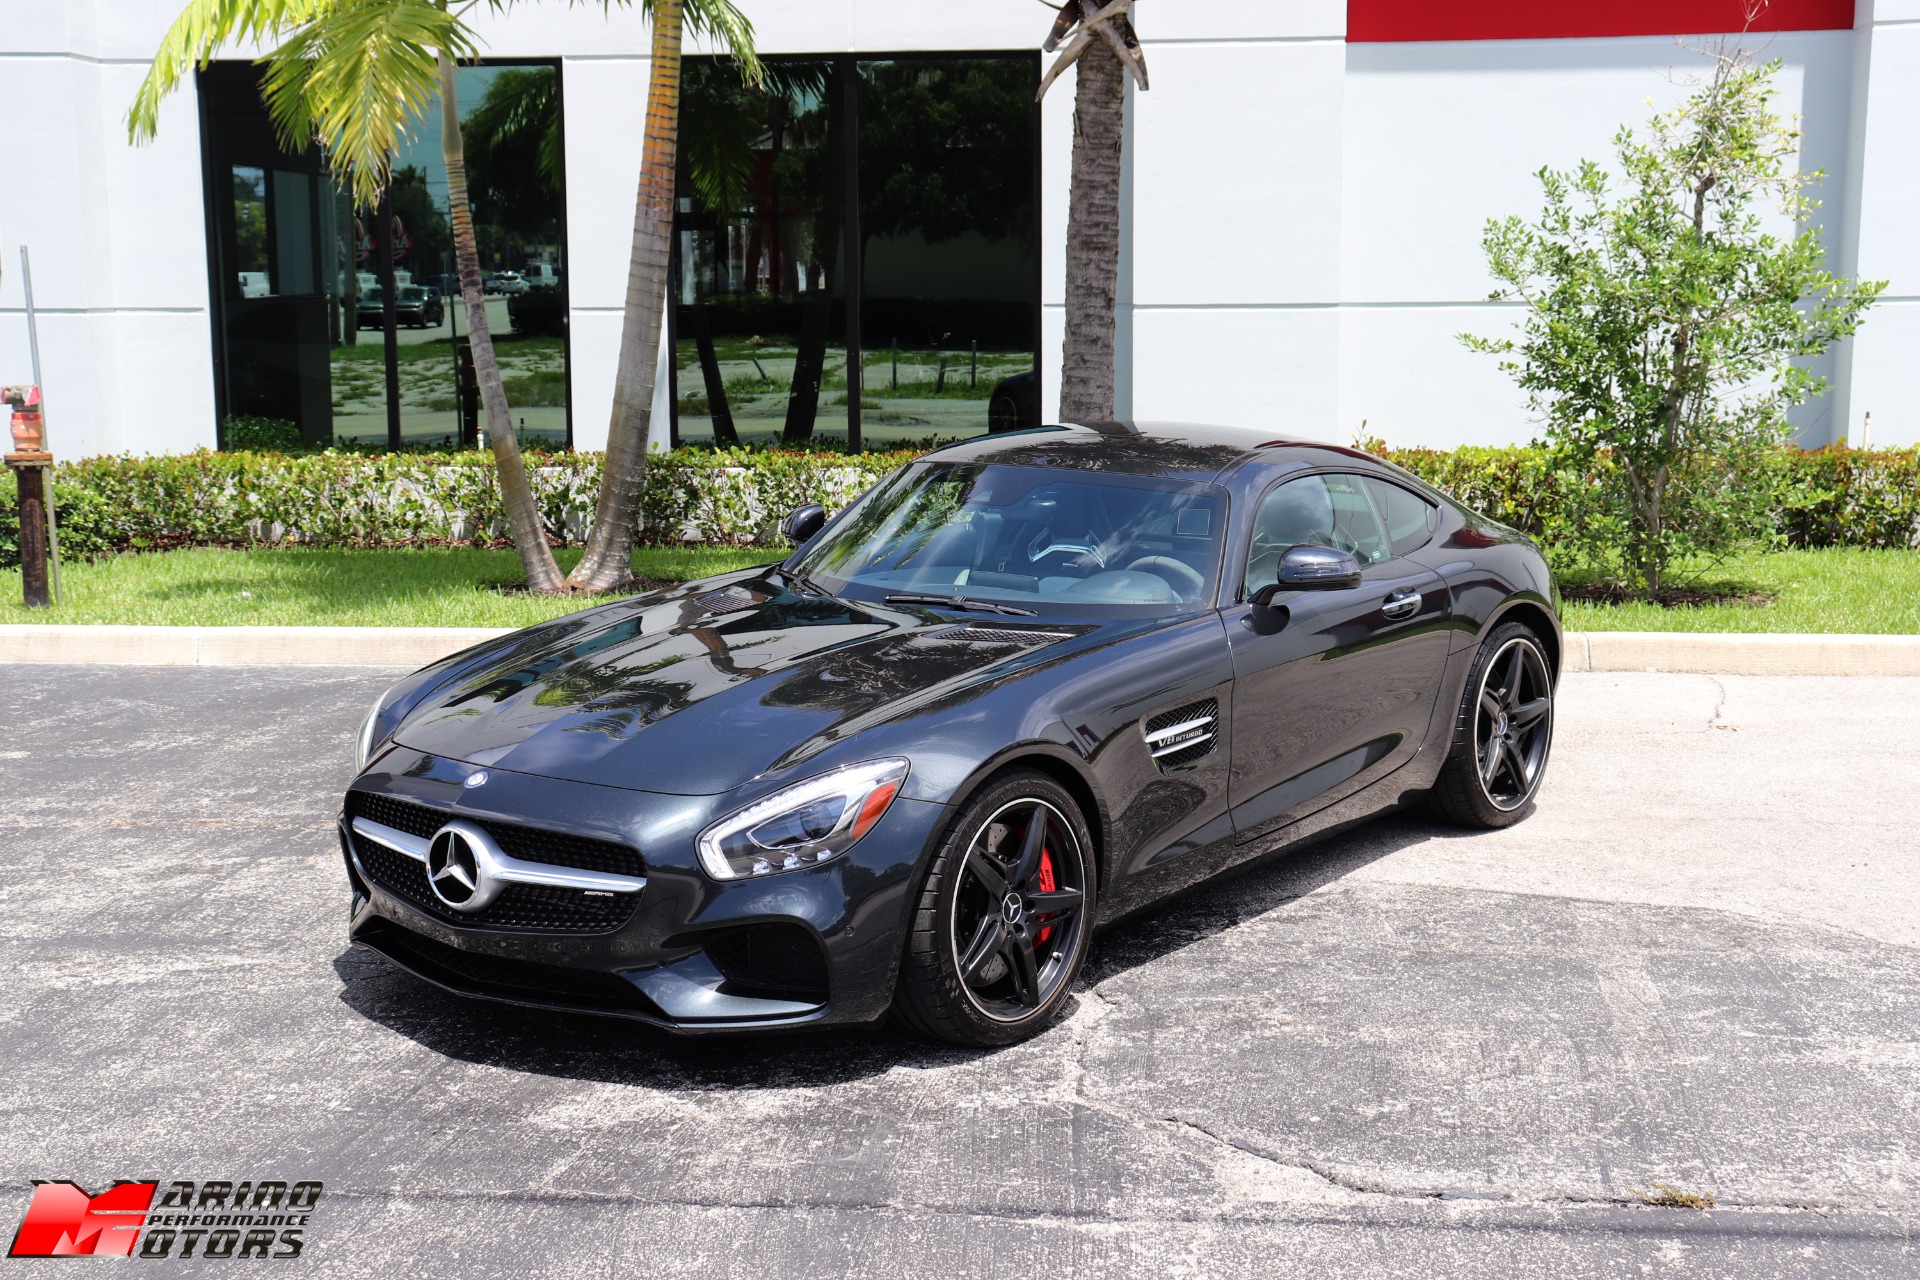 Used 2016 Mercedes Benz Amg Gt S For Sale 94900 Marino